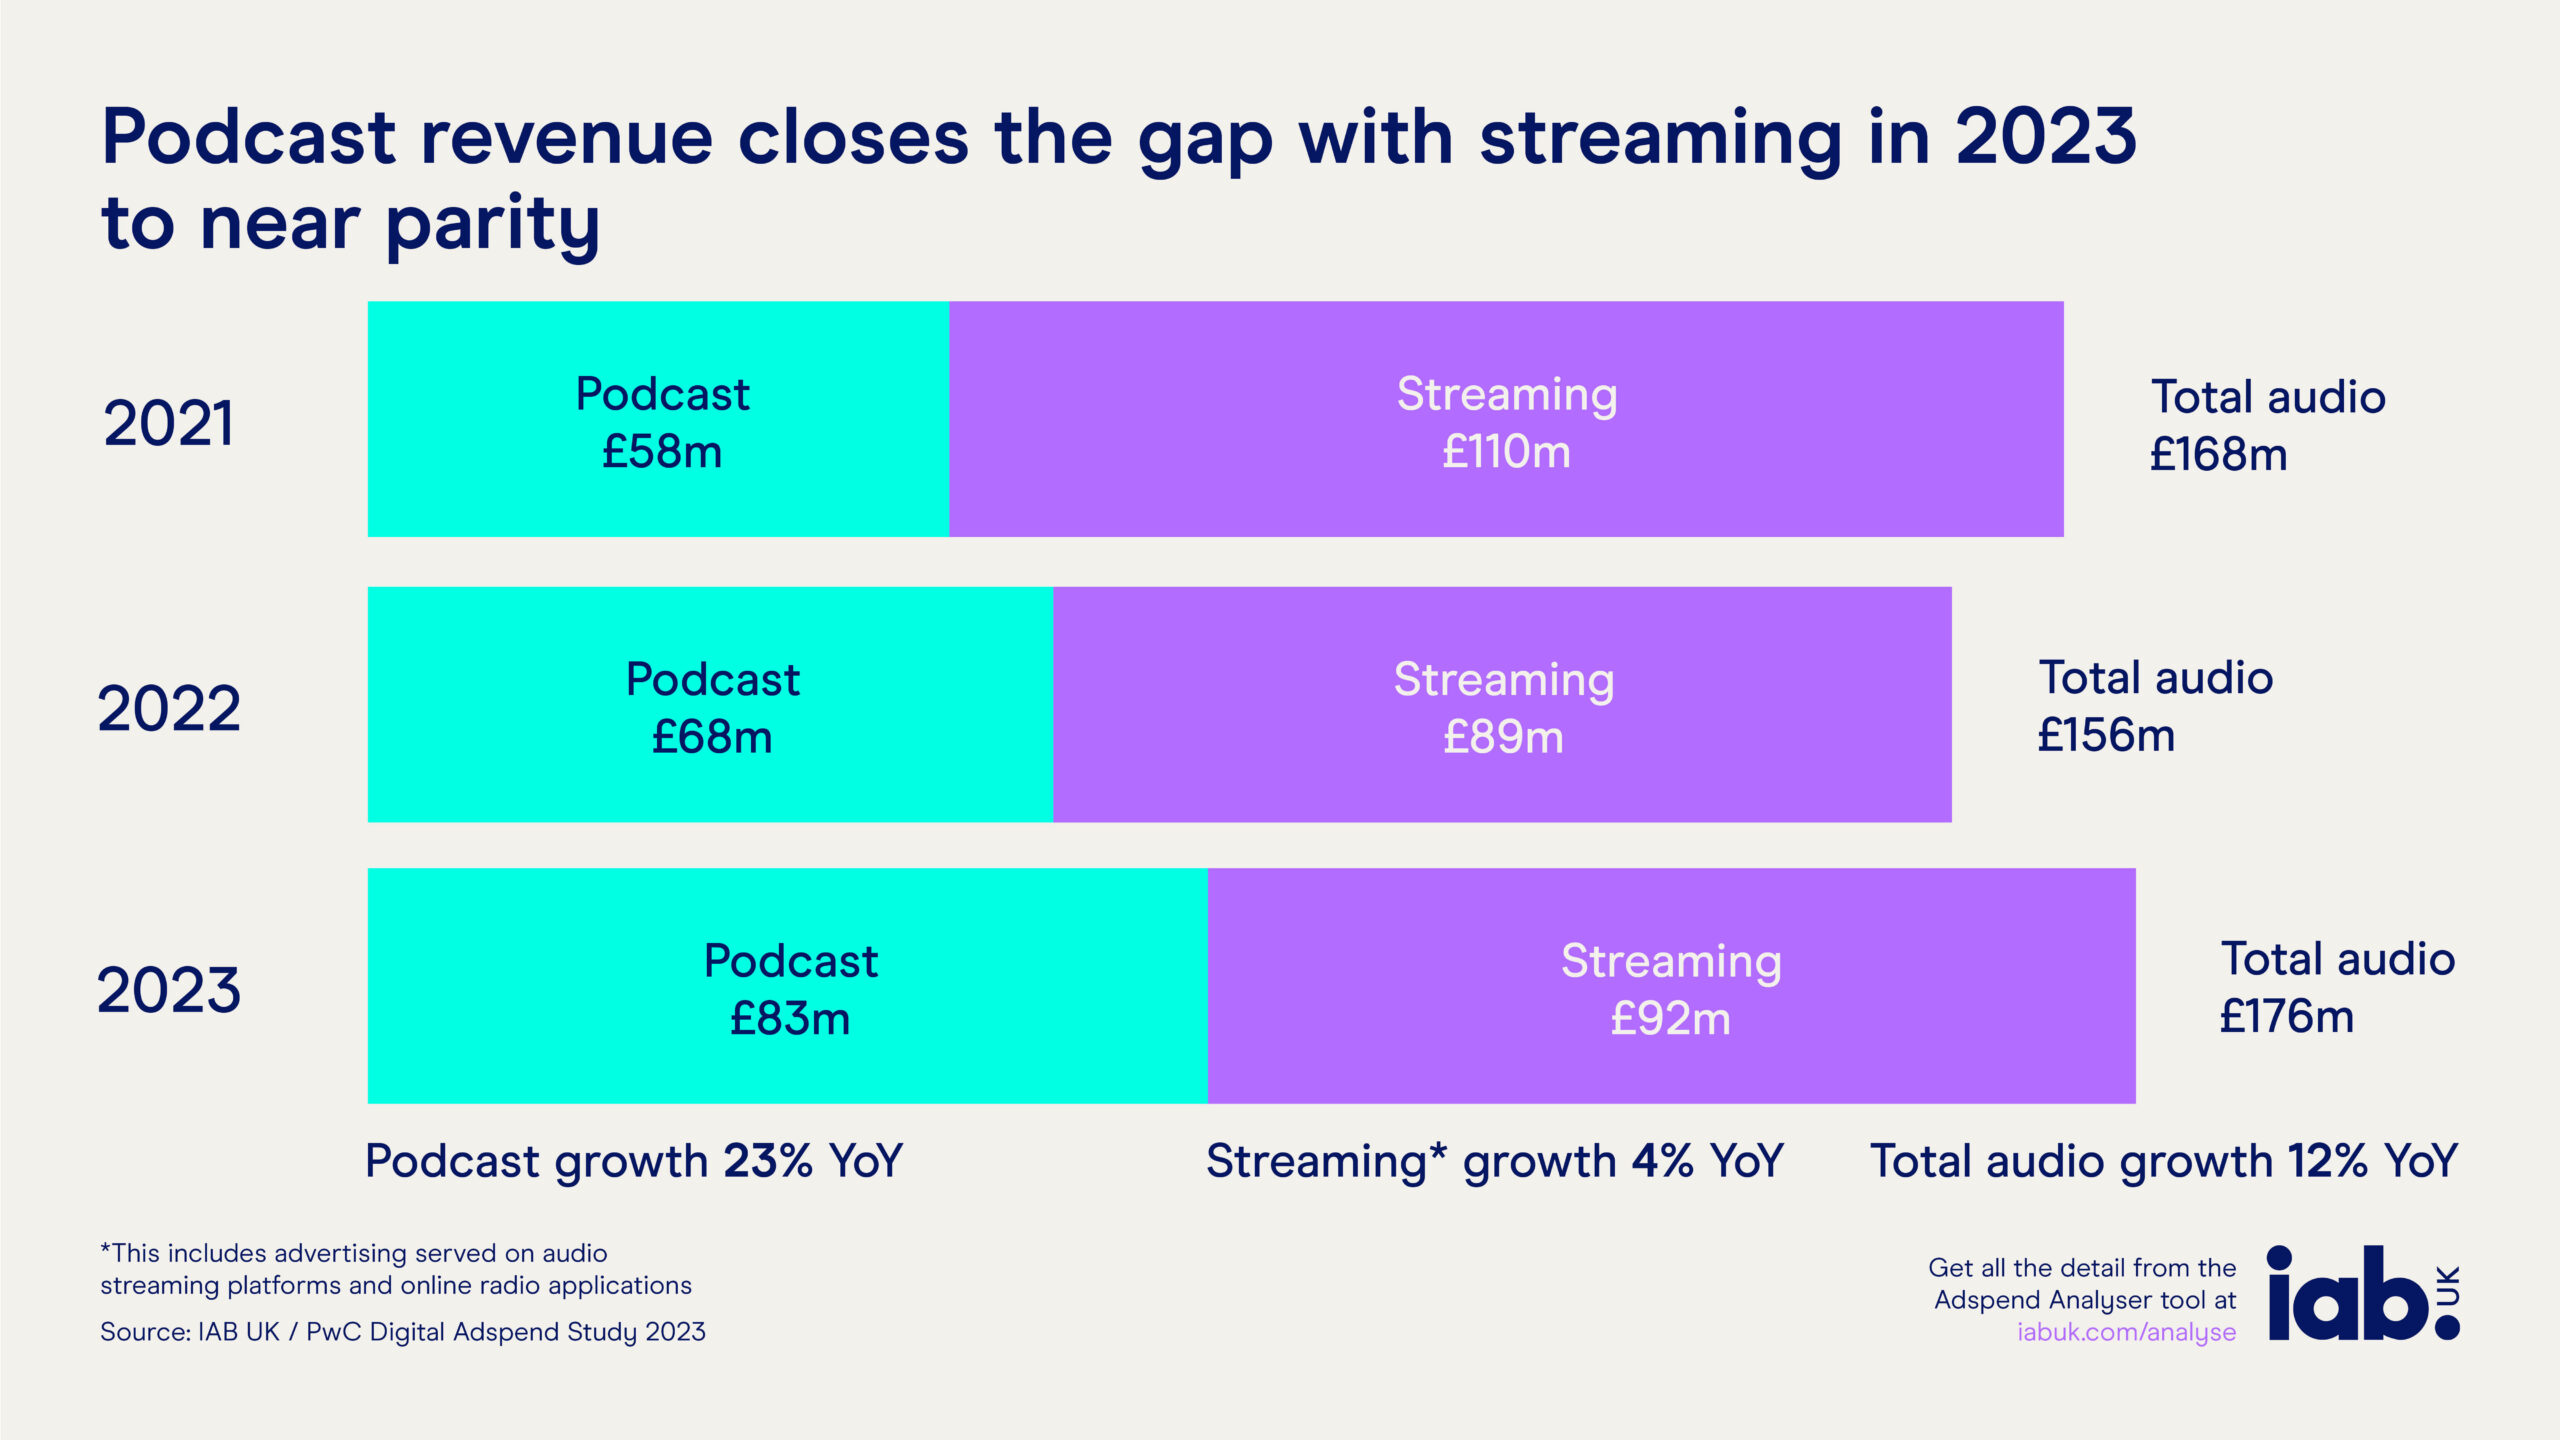 Podcast & streaming spend